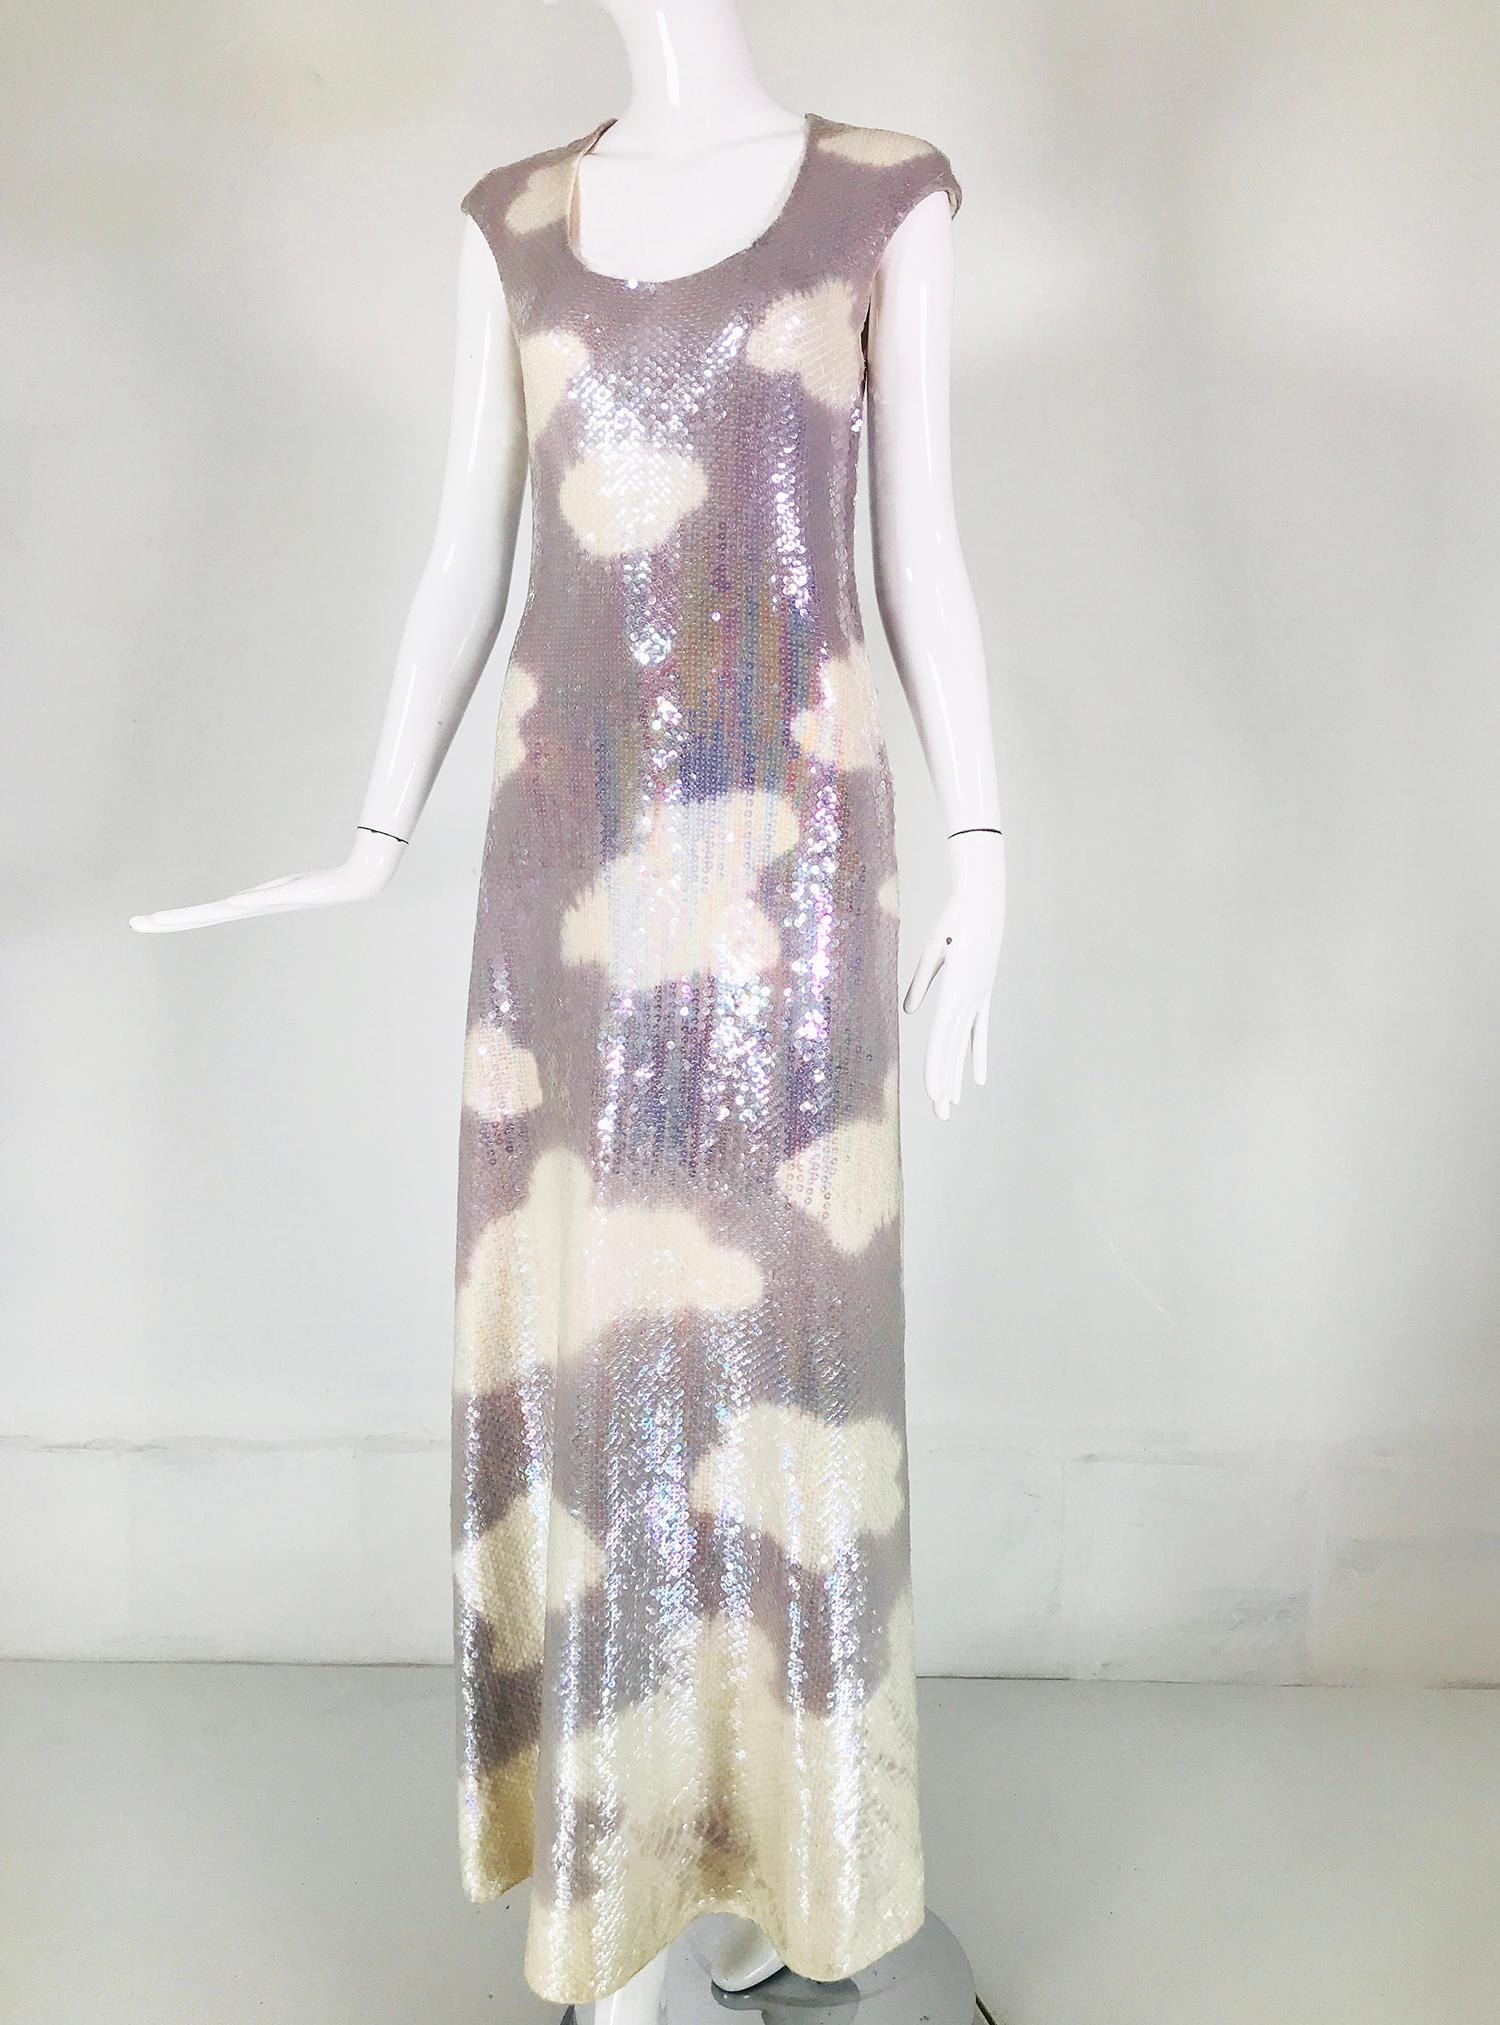 Halston Iconic Clouds Dress in Stormy Grey & Cream Iridescent Sequins Mid 1970s 9